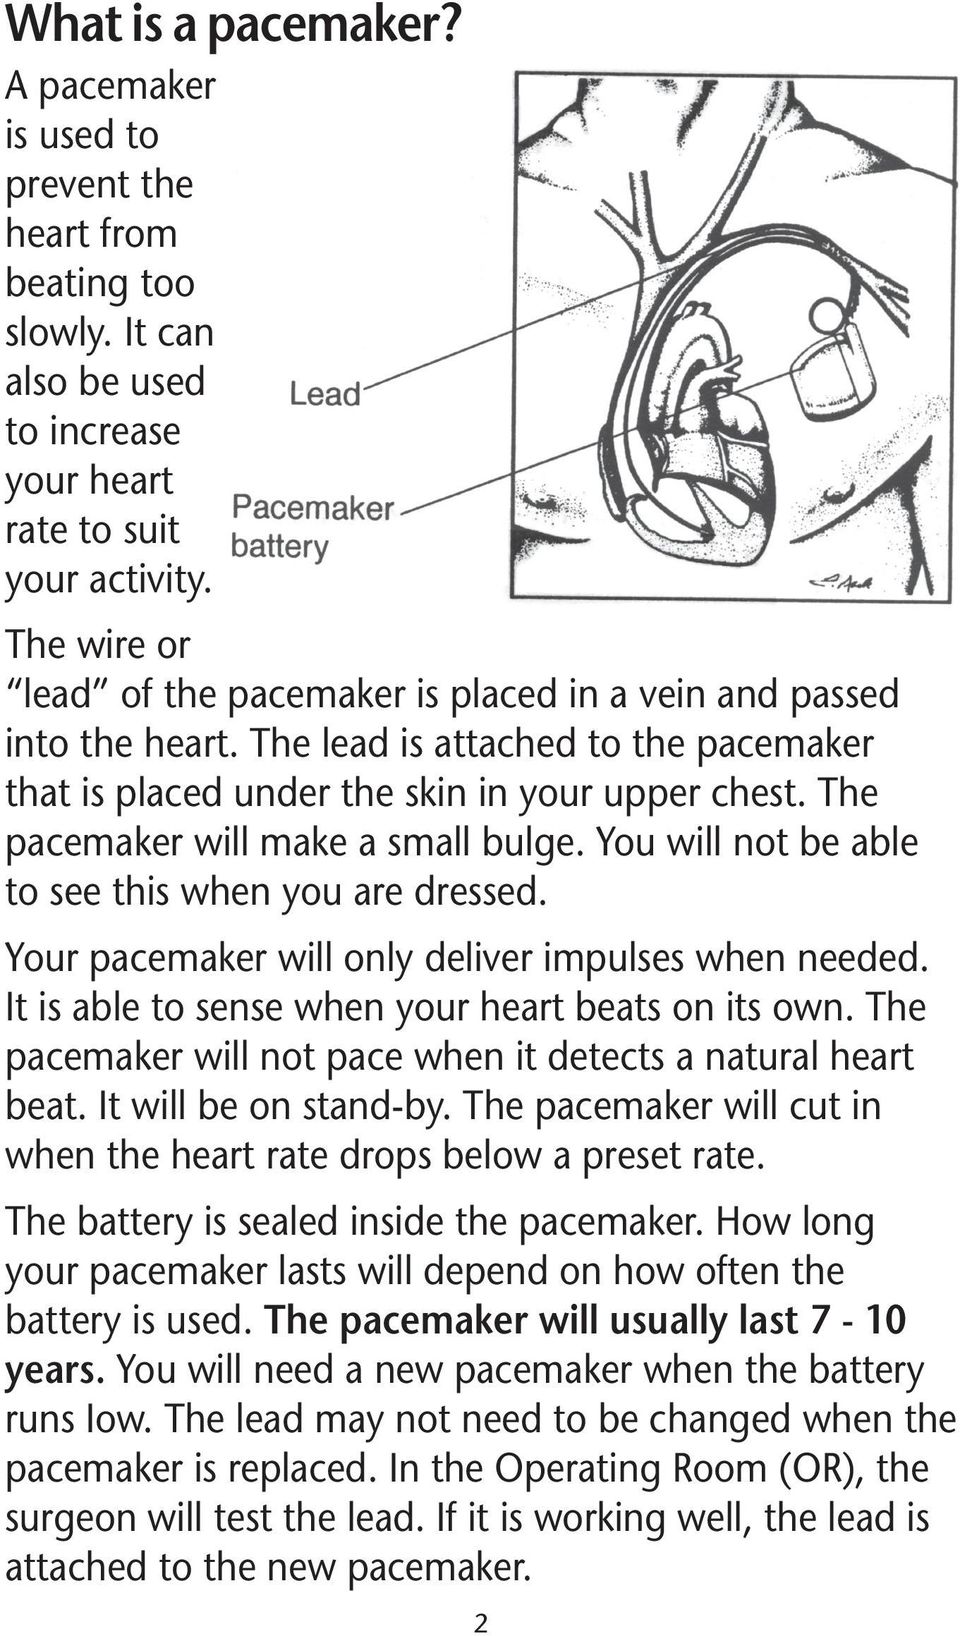 The pacemaker will make a small bulge. You will not be able to see this when you are dressed. Your pacemaker will only deliver impulses when needed.